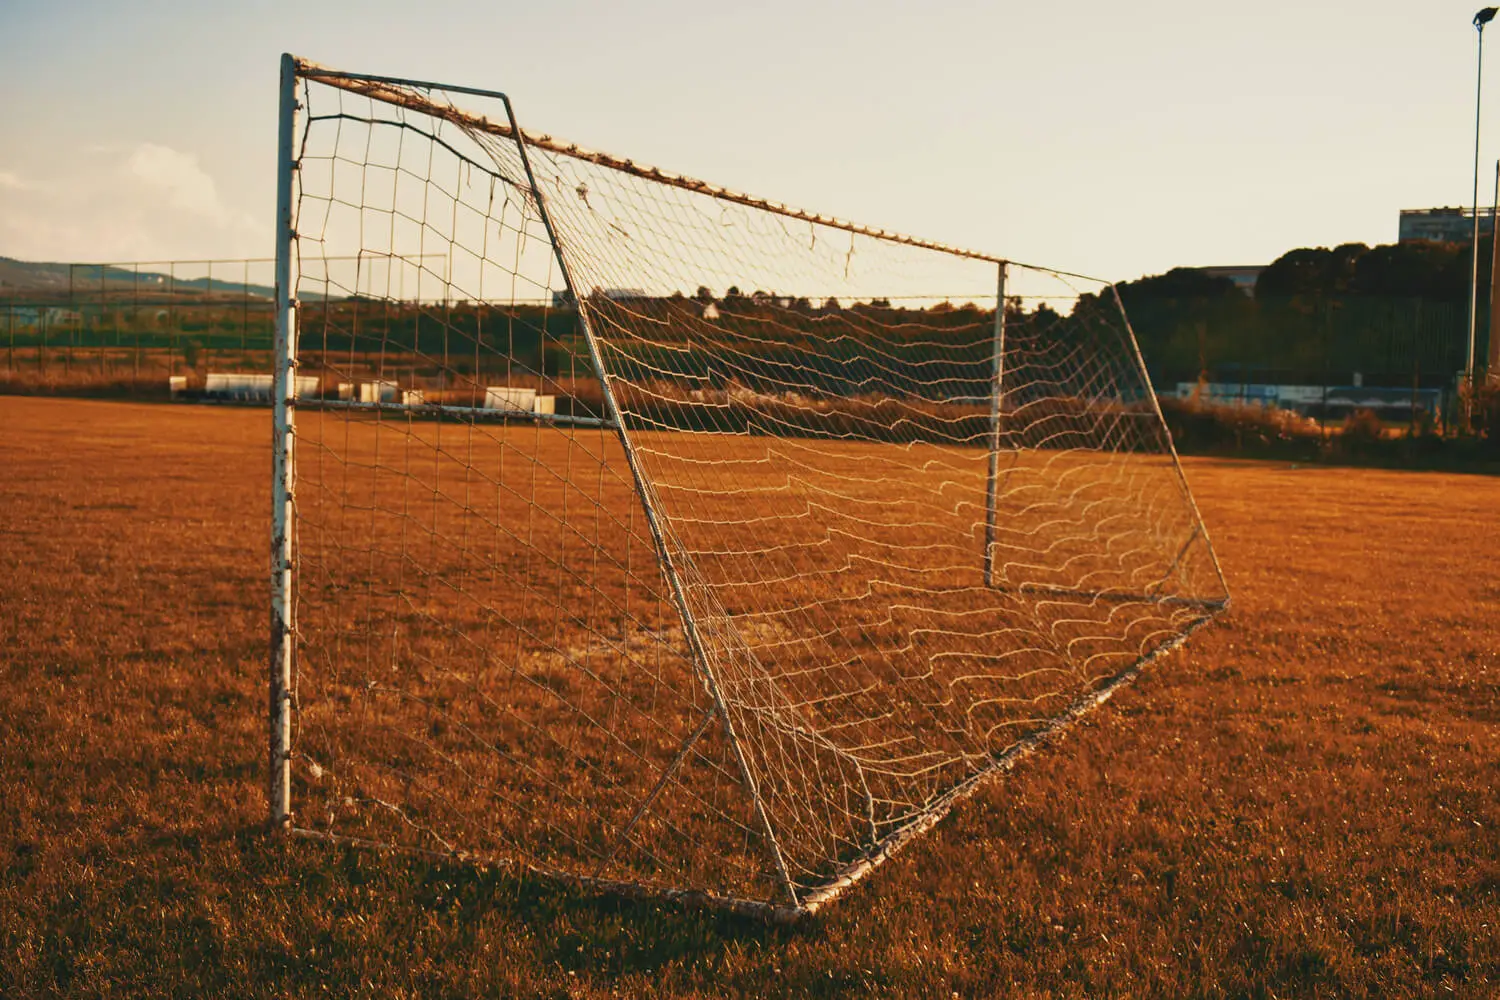 Soccer goal on brown pitch